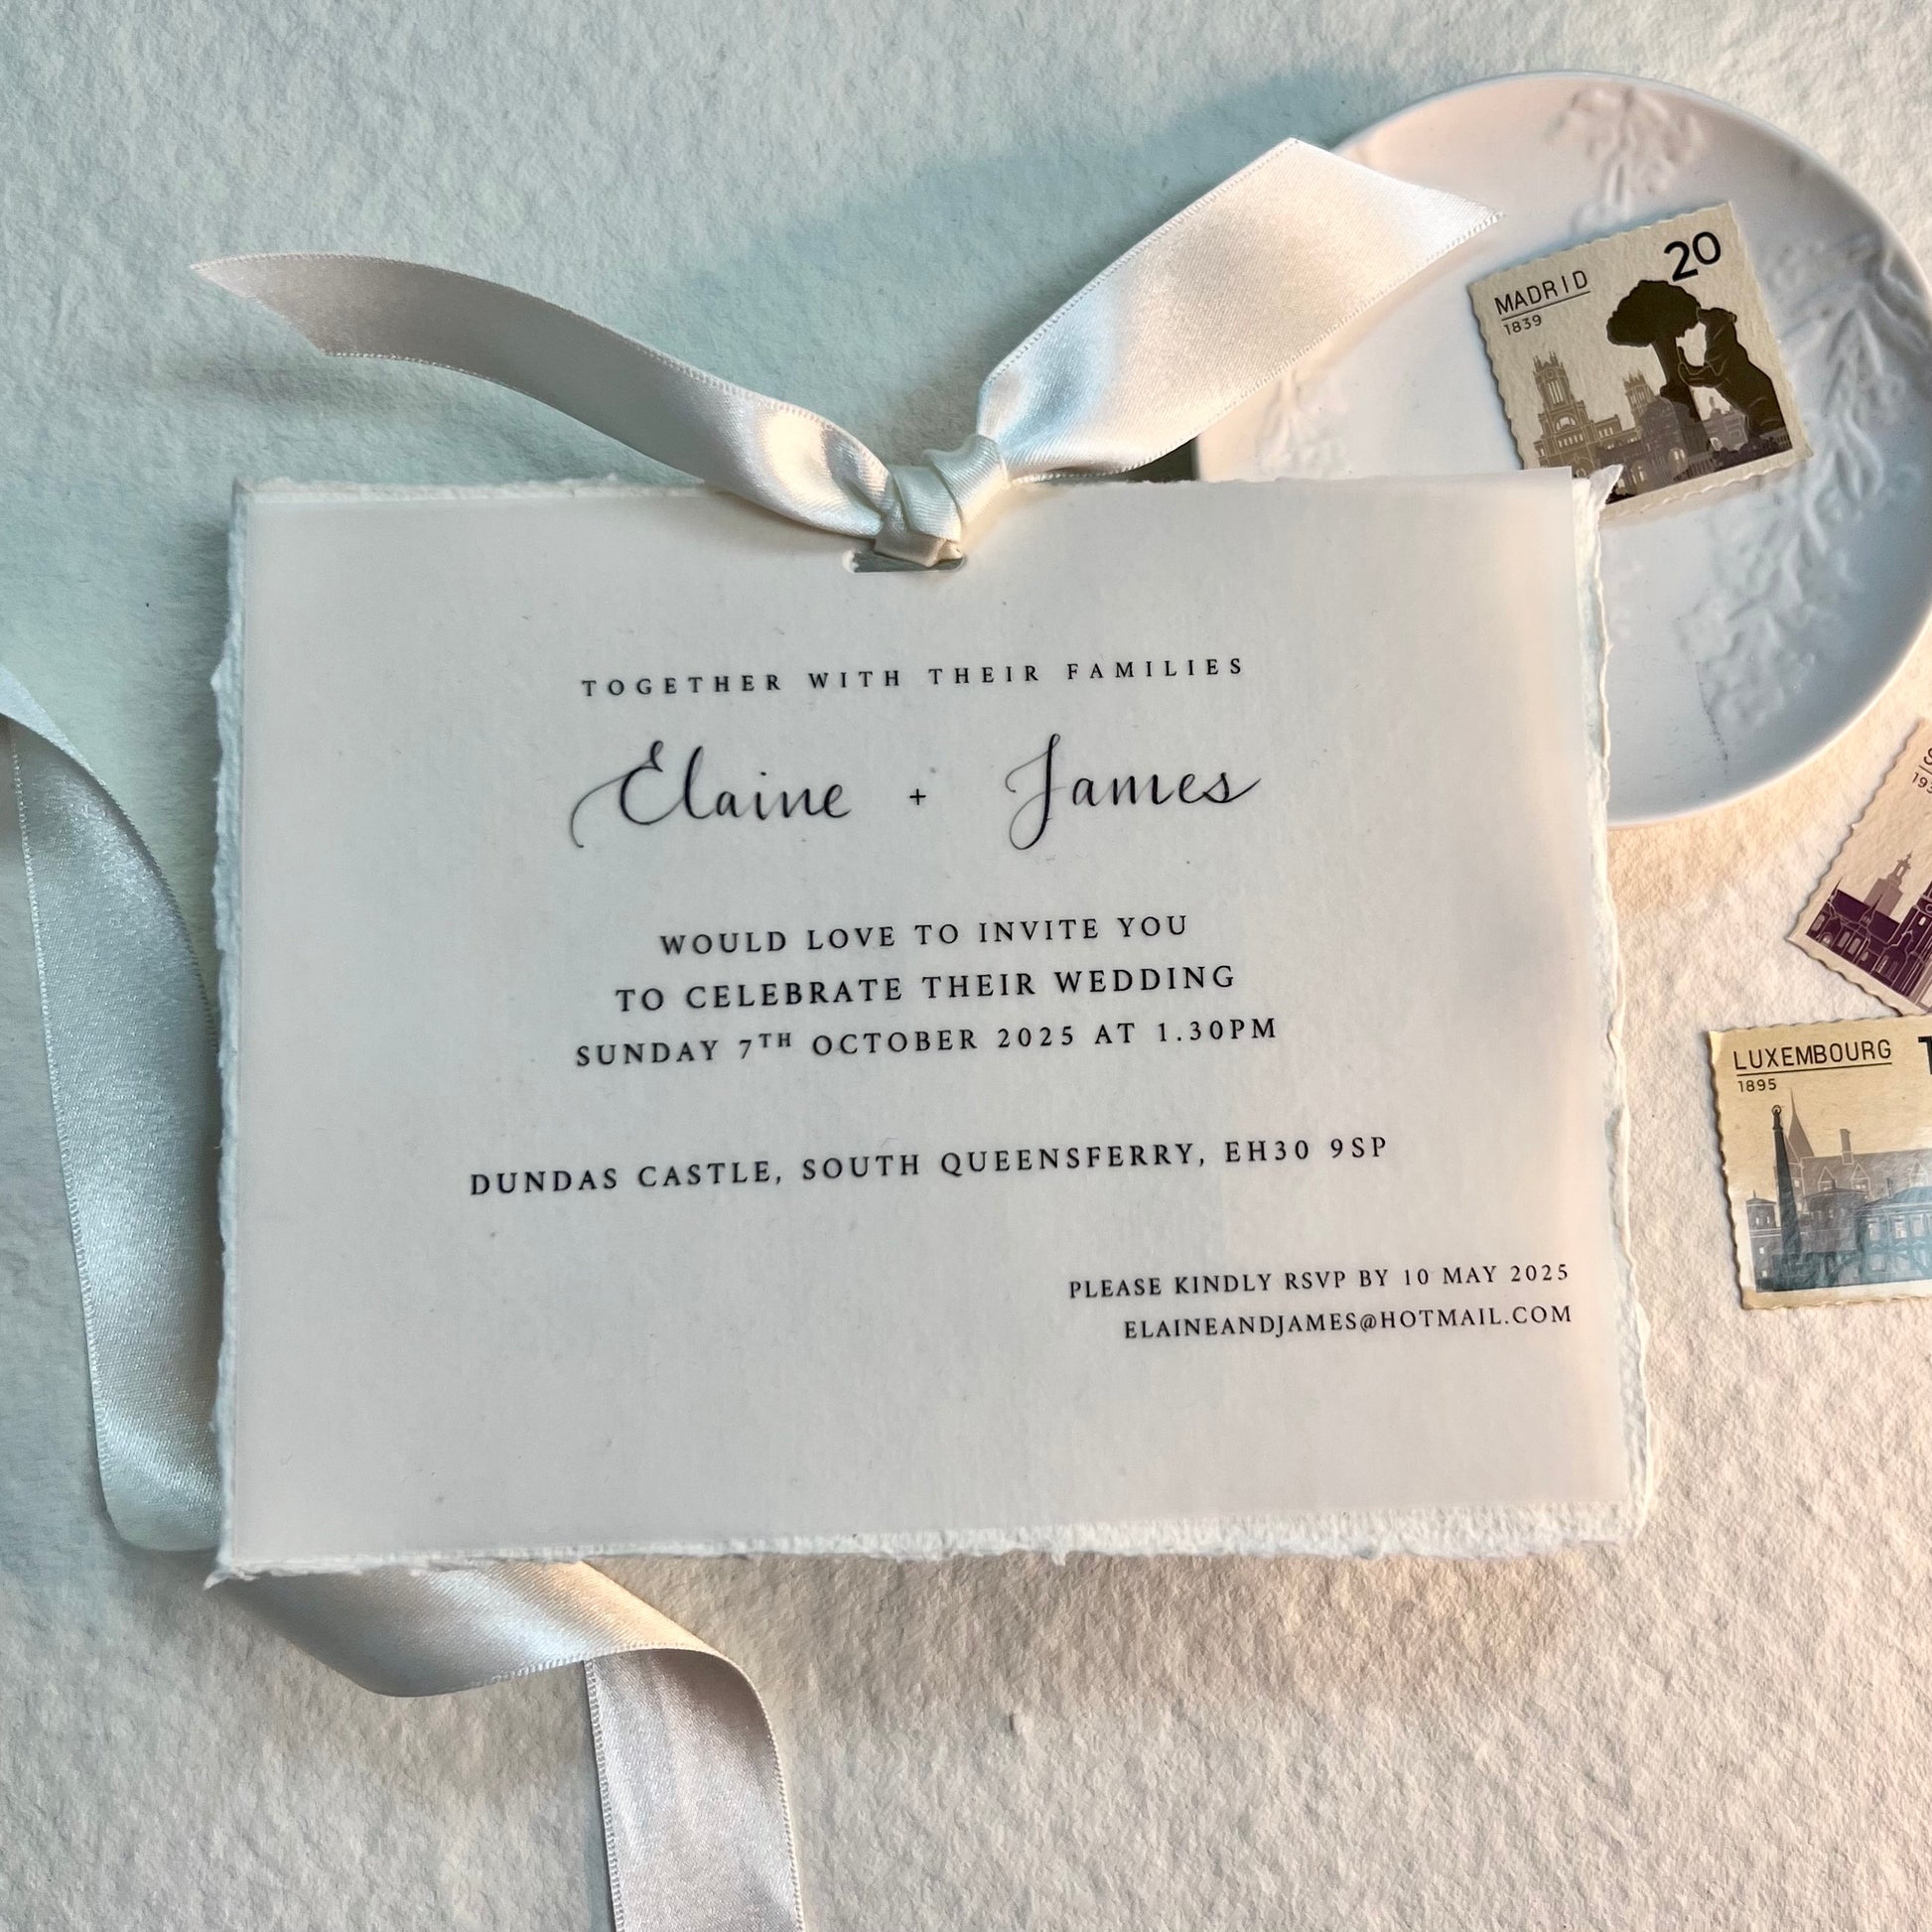 handmade paper with vellum invitation tied with ivory satin ribbon. styled in picture with trinket dish and stamps with draped ribbons